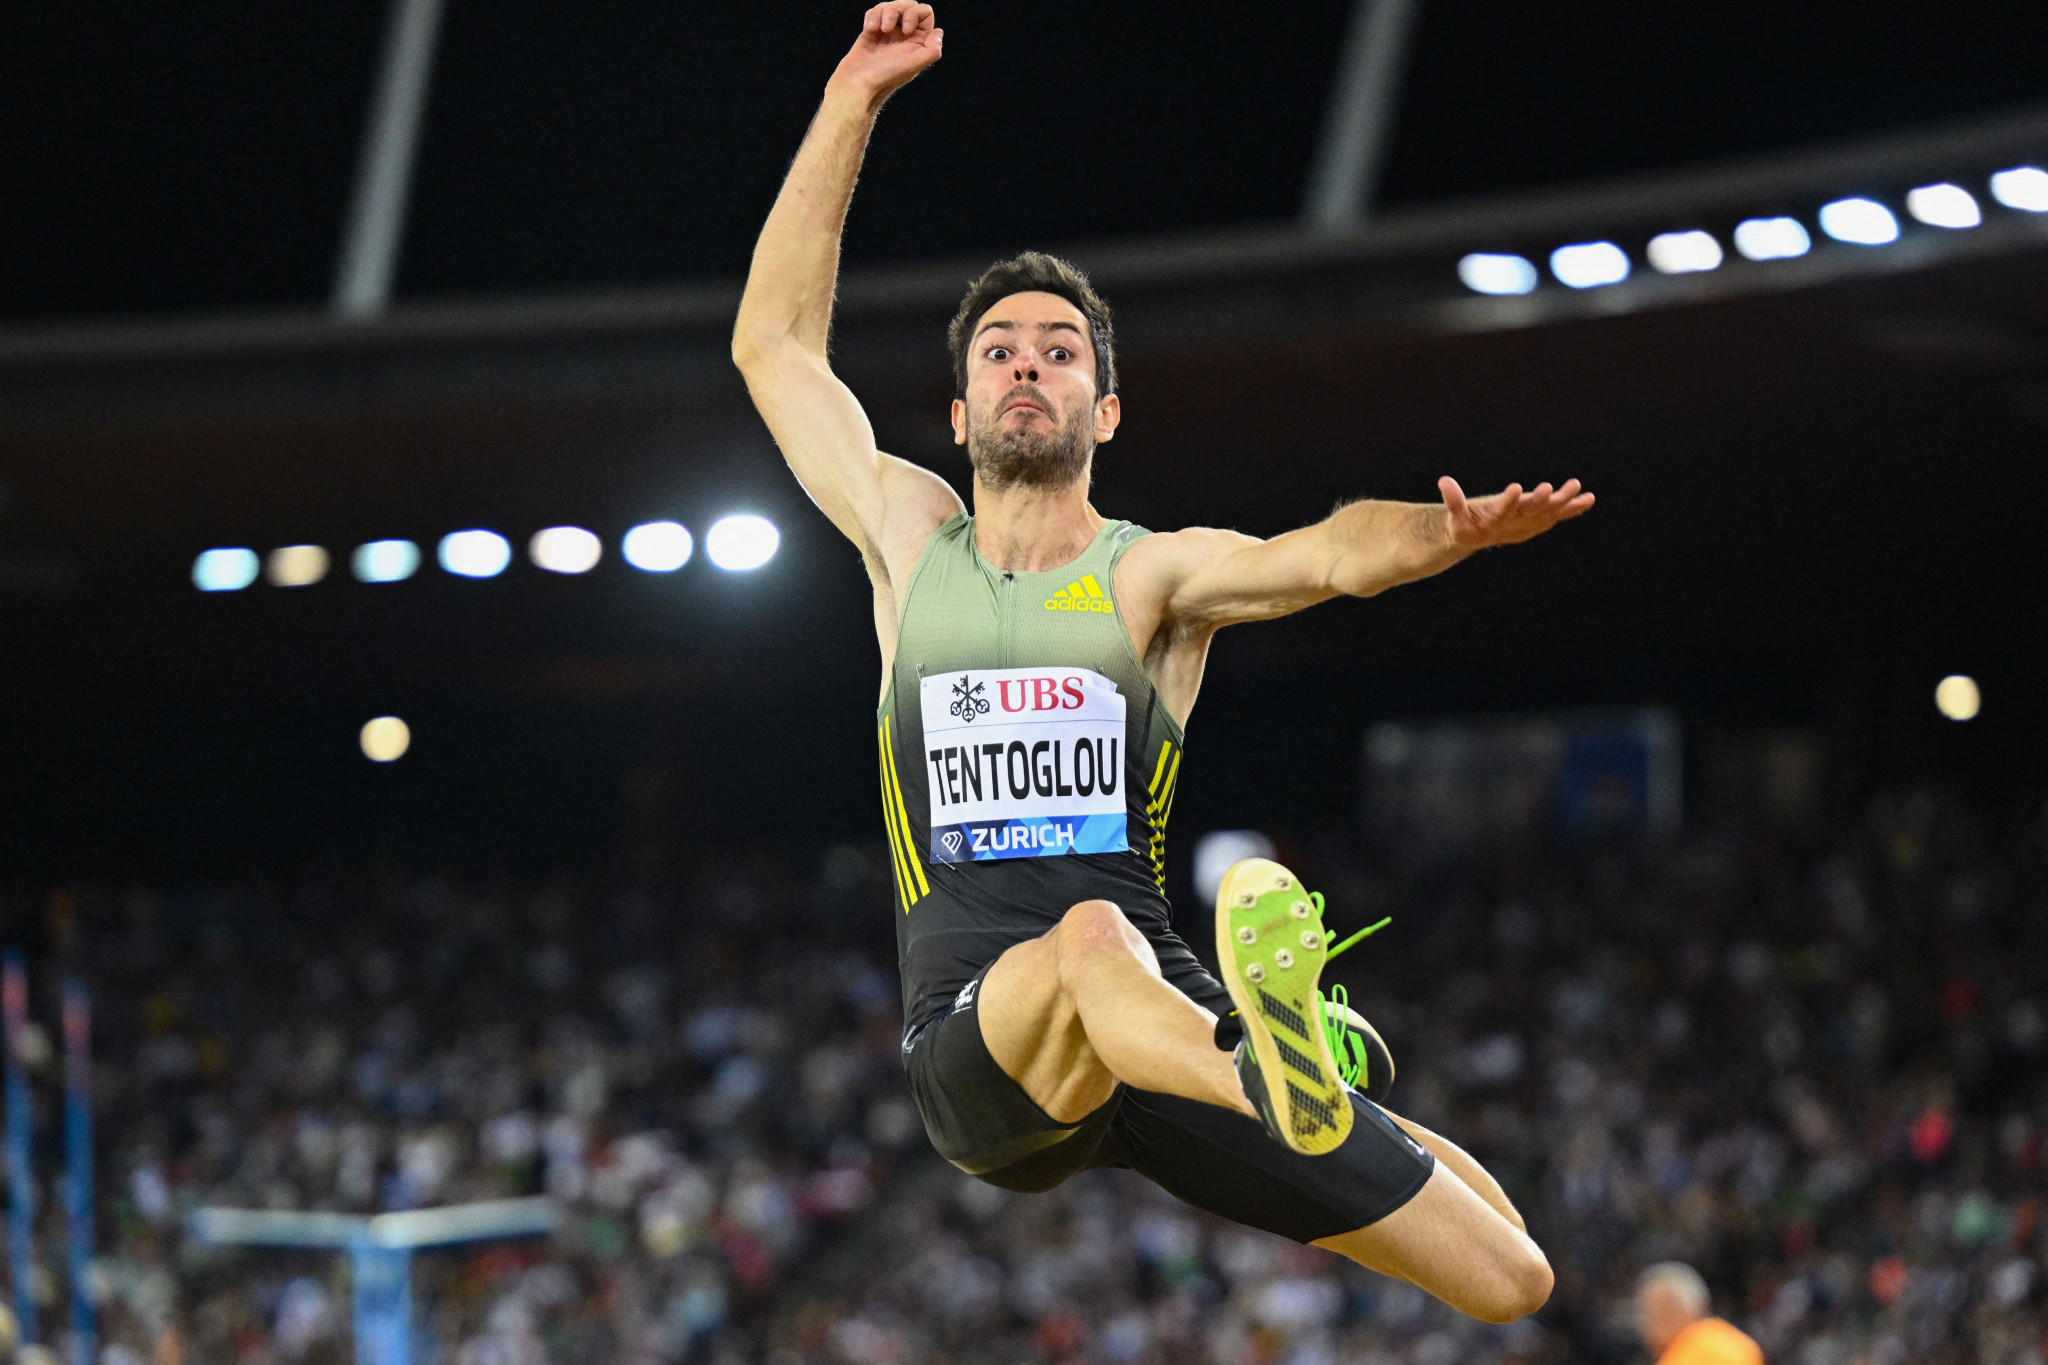 Olympic long jump champion Tentóglou to auction controversial shoes for earthquake relief